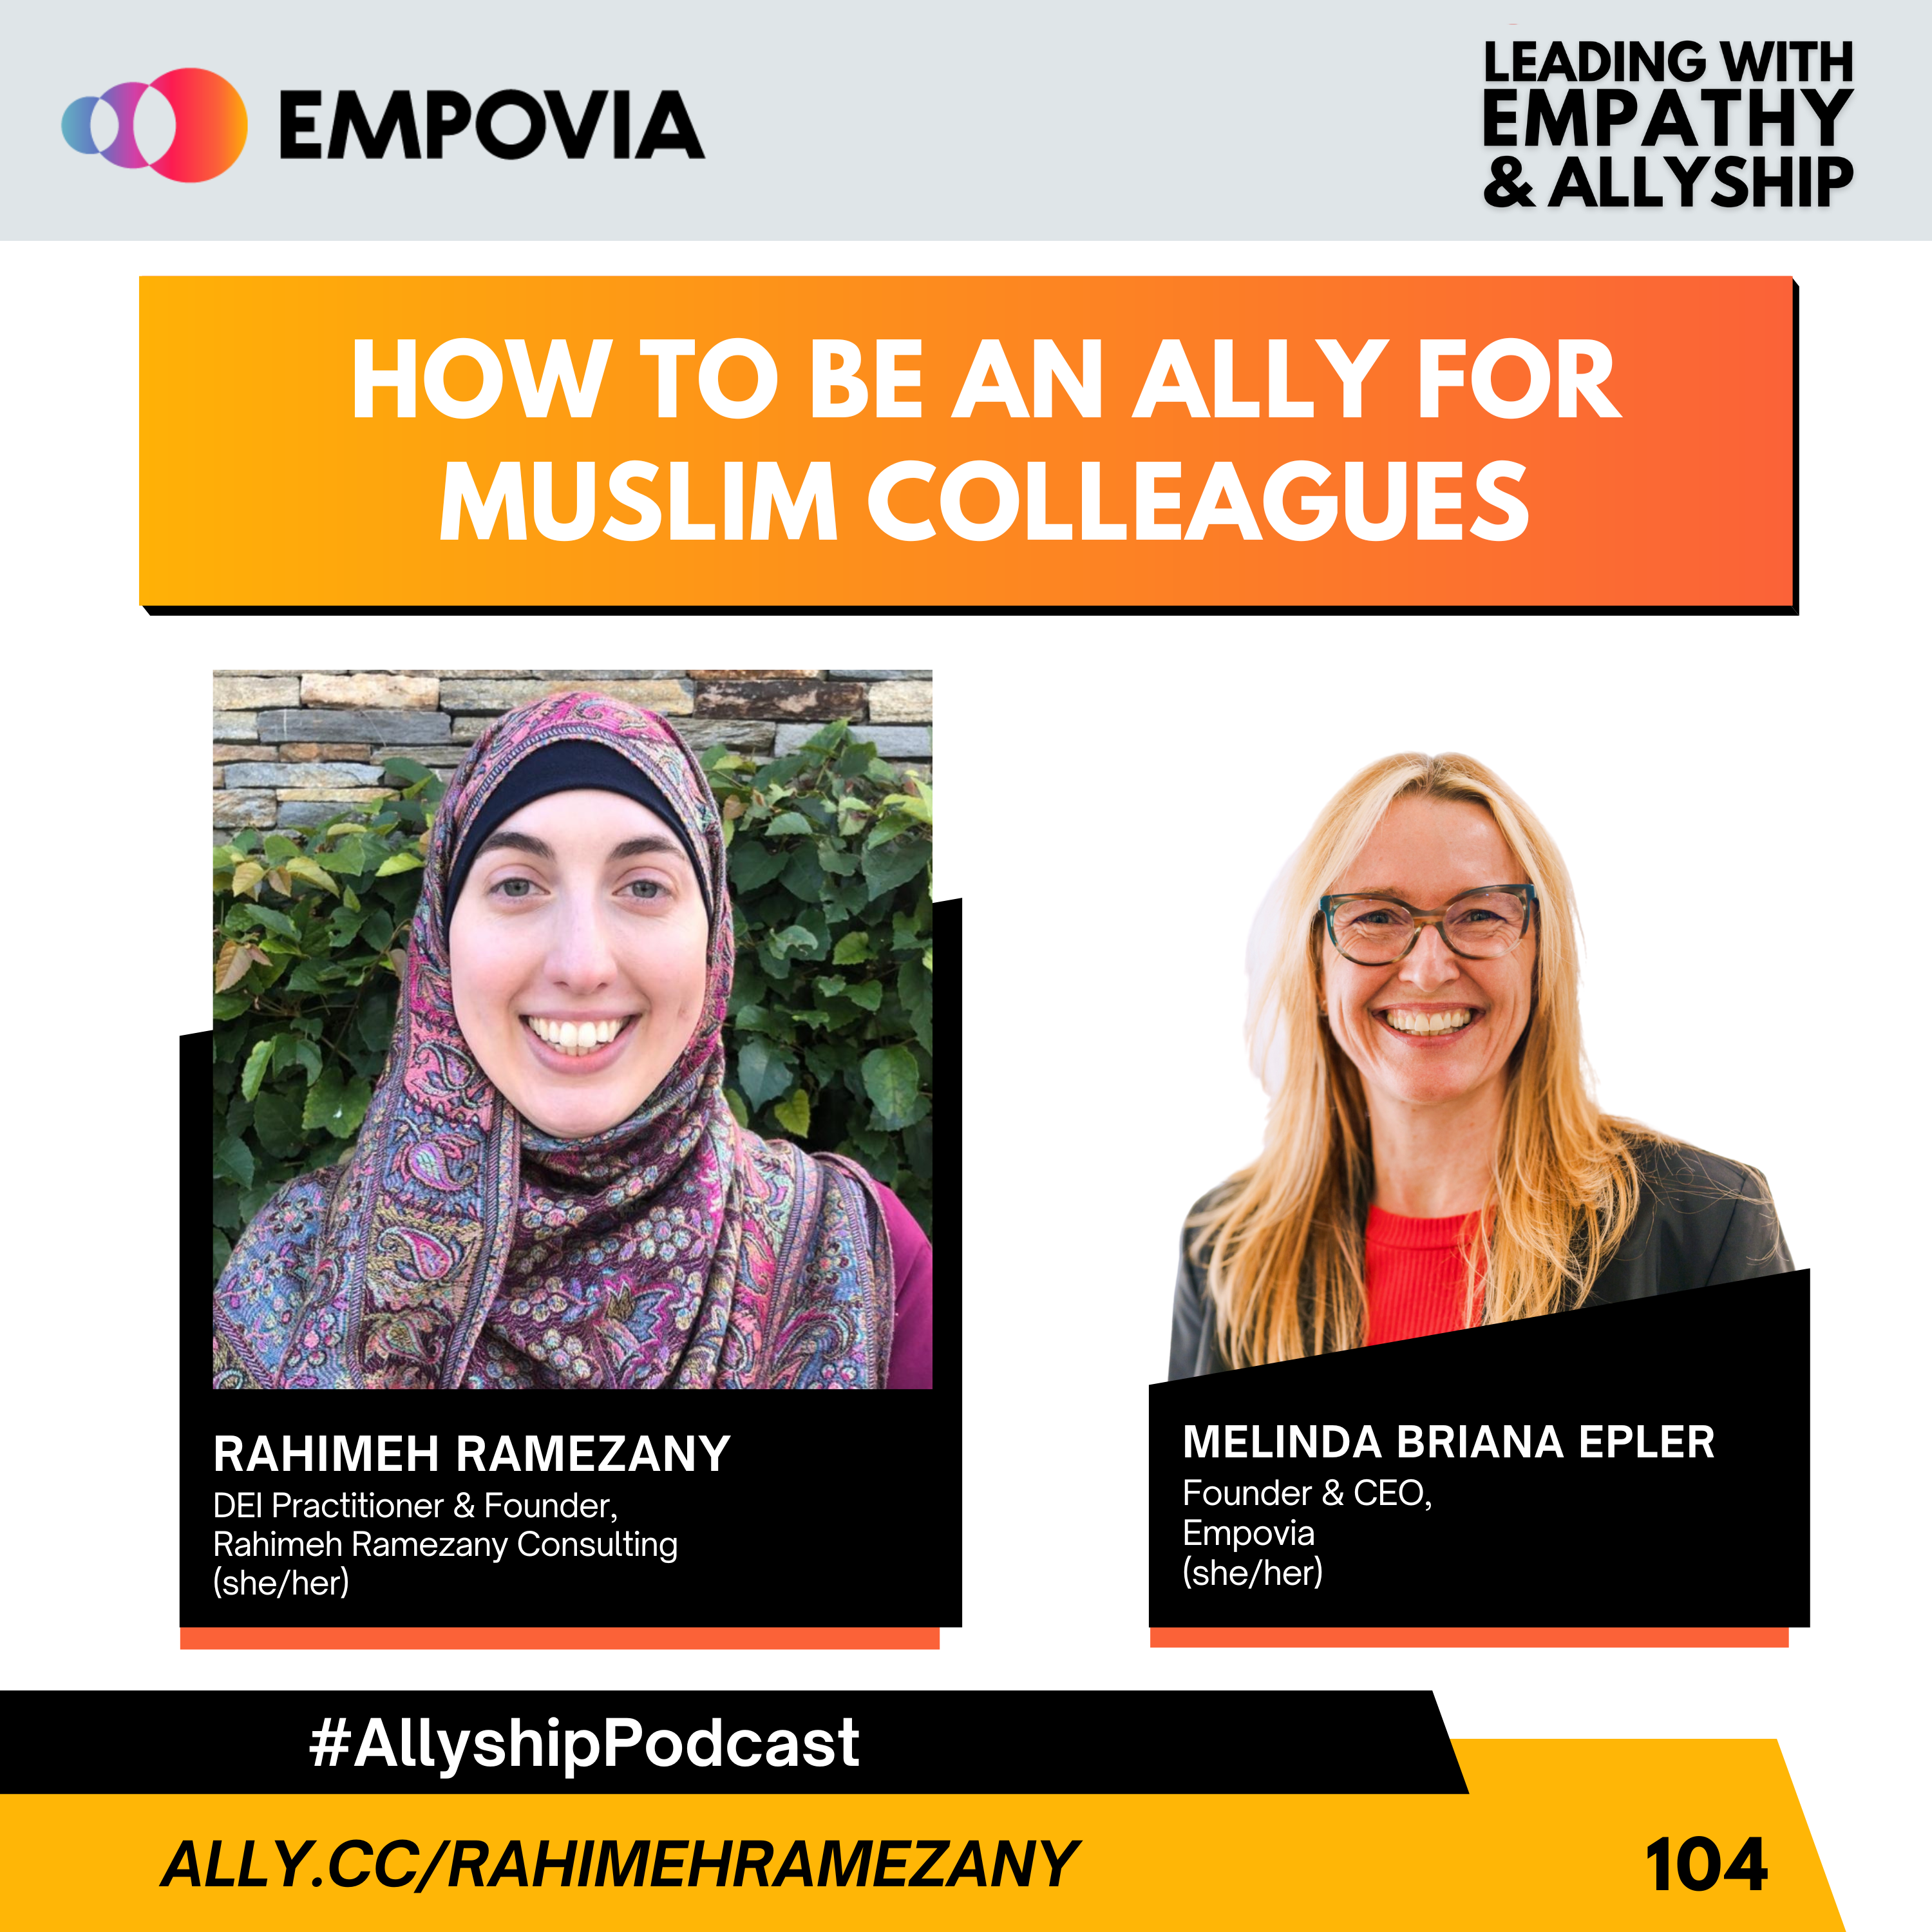 Leading With Empathy & Allyship promo and photos of Rahimeh Ramezany, a pale-skinned Muslim woman wearing a multi-colored religious headscarf with pinks, blues, and purples and a fuchsia blouse; and host Melinda Briana Epler, a White woman with blonde and red hair, glasses, red shirt, and black jacket.